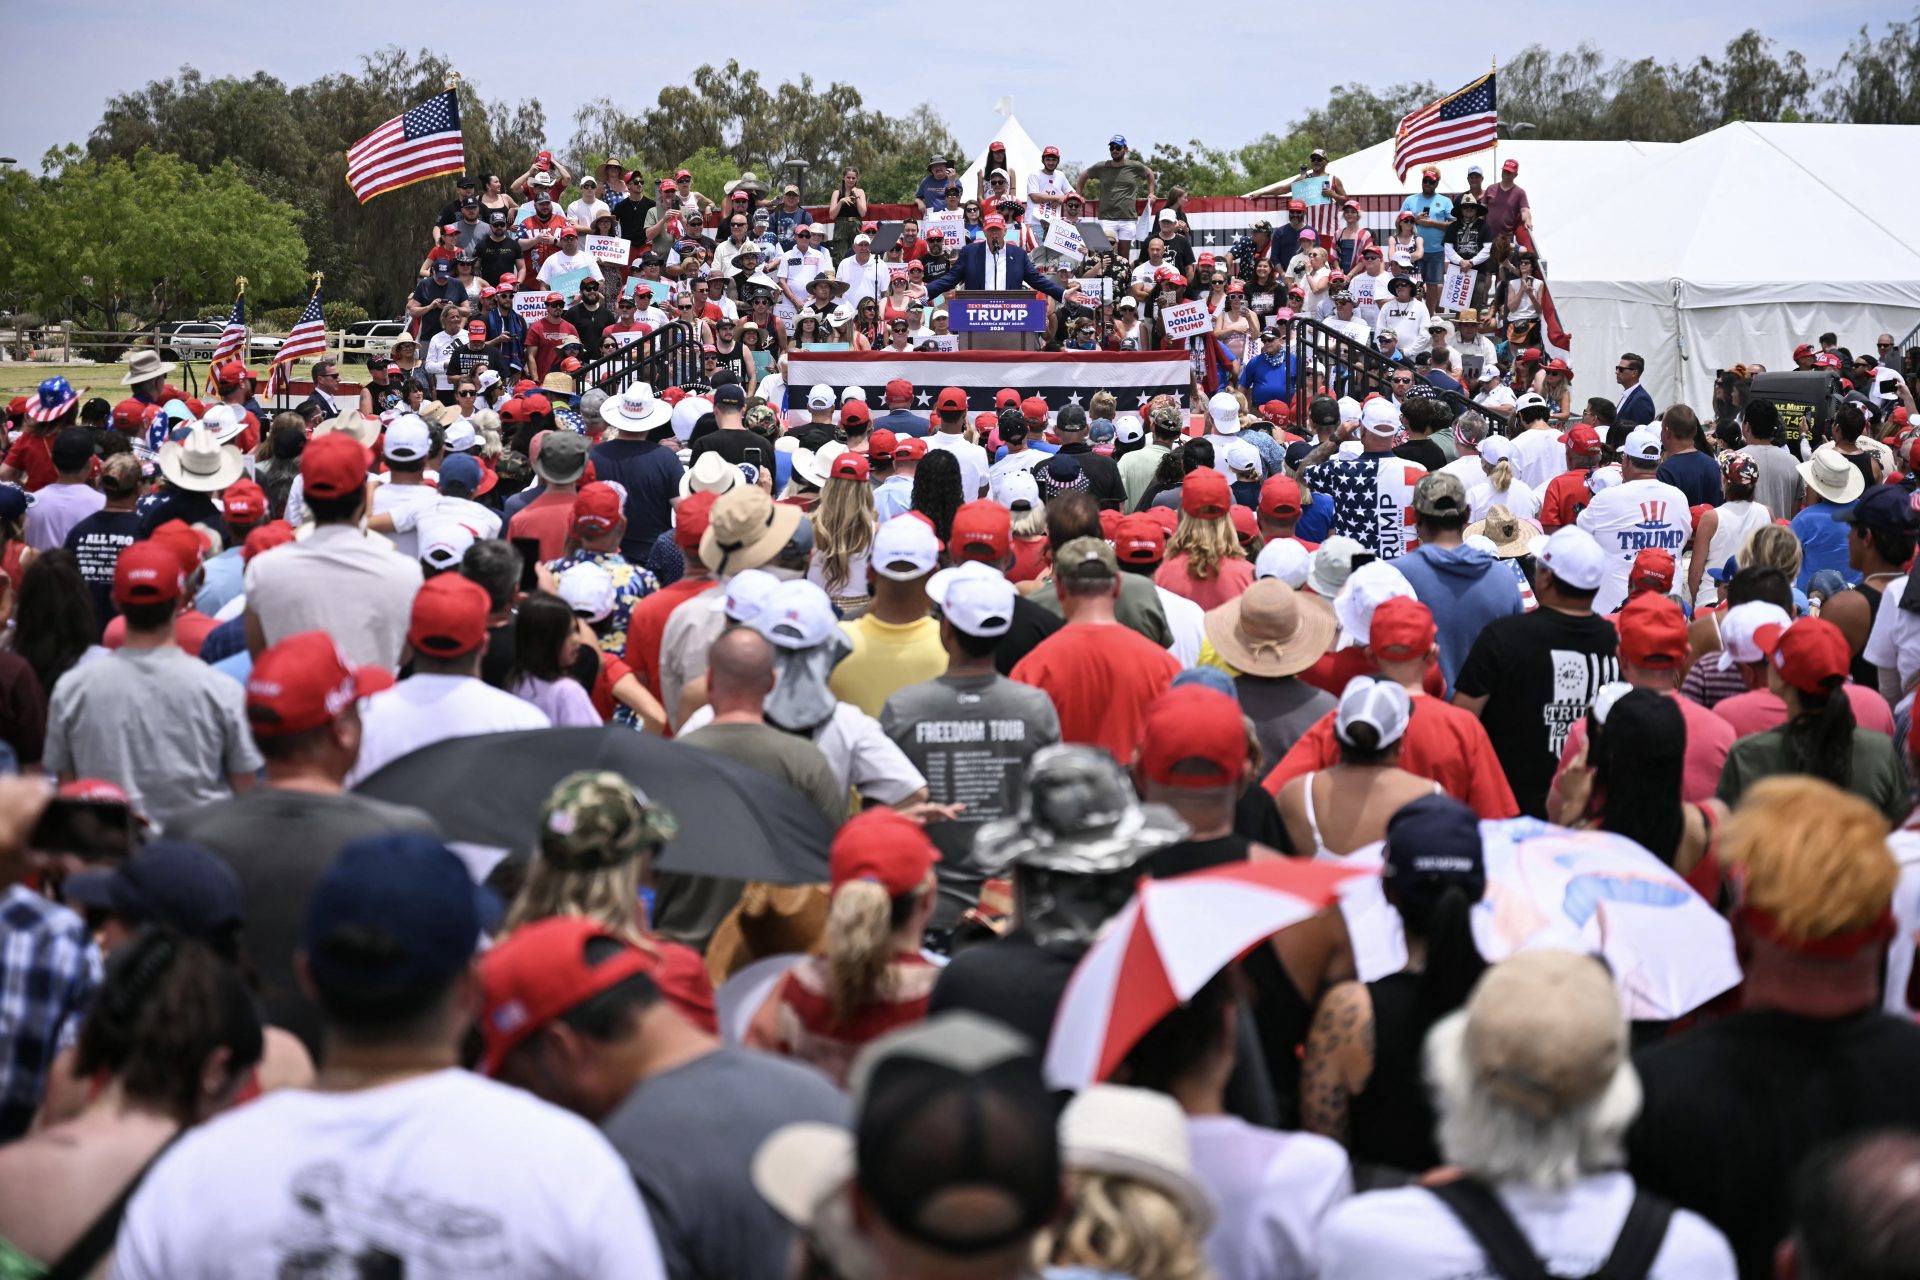 Thousands came out to see Trump speak 